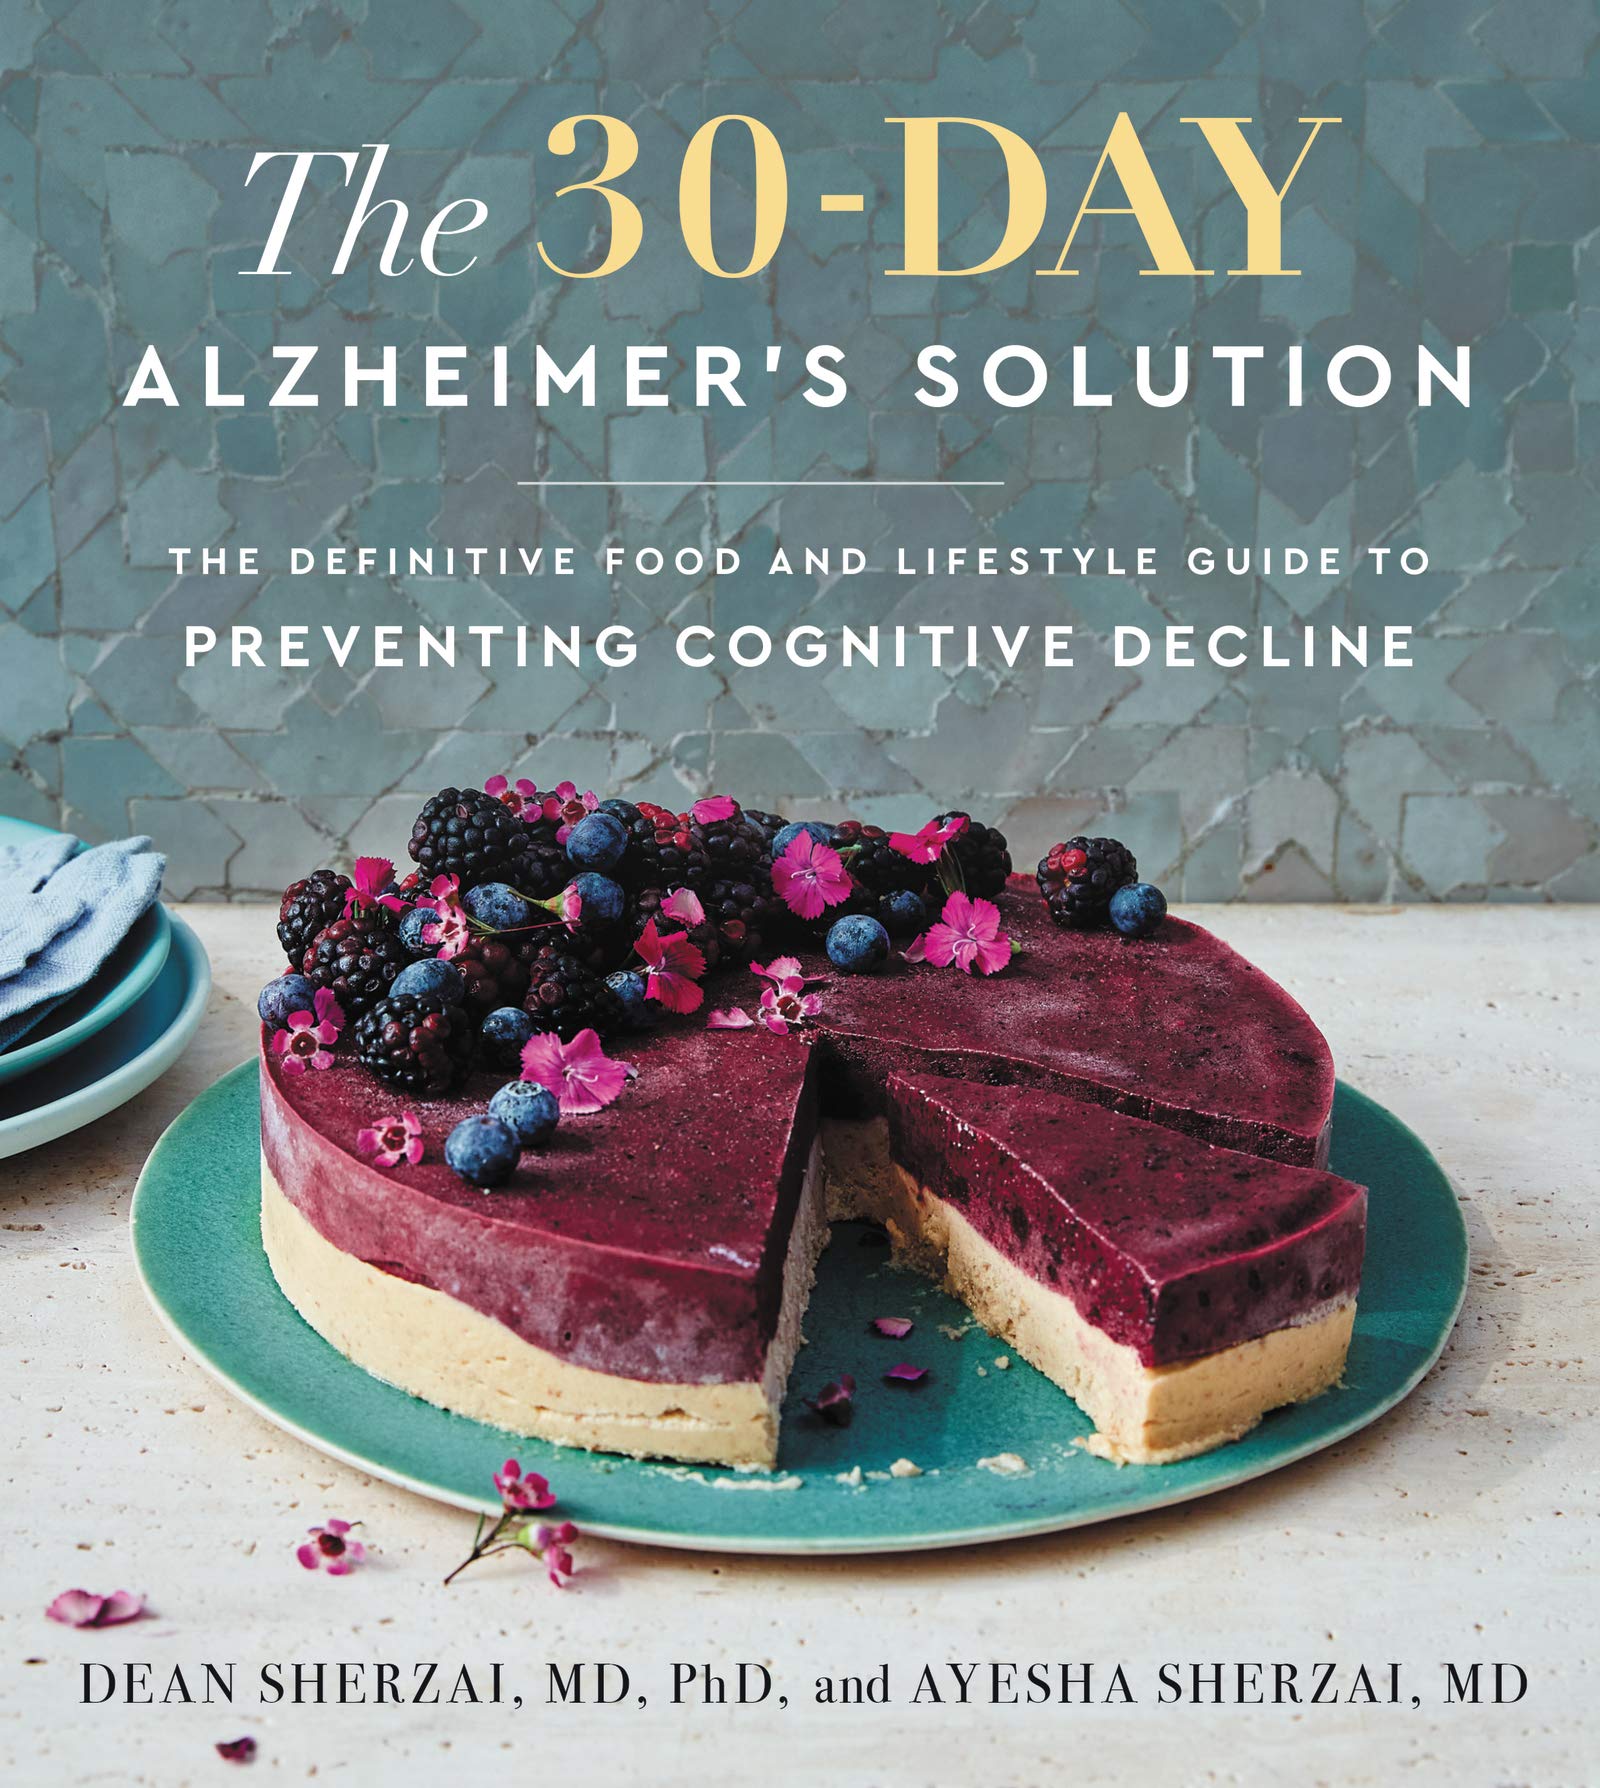 Dean Sherzai The 30-Day Alzheimers Solution The Definitive Food and Lifestyle Guide to Preventing Cognitive Decline Hardcover